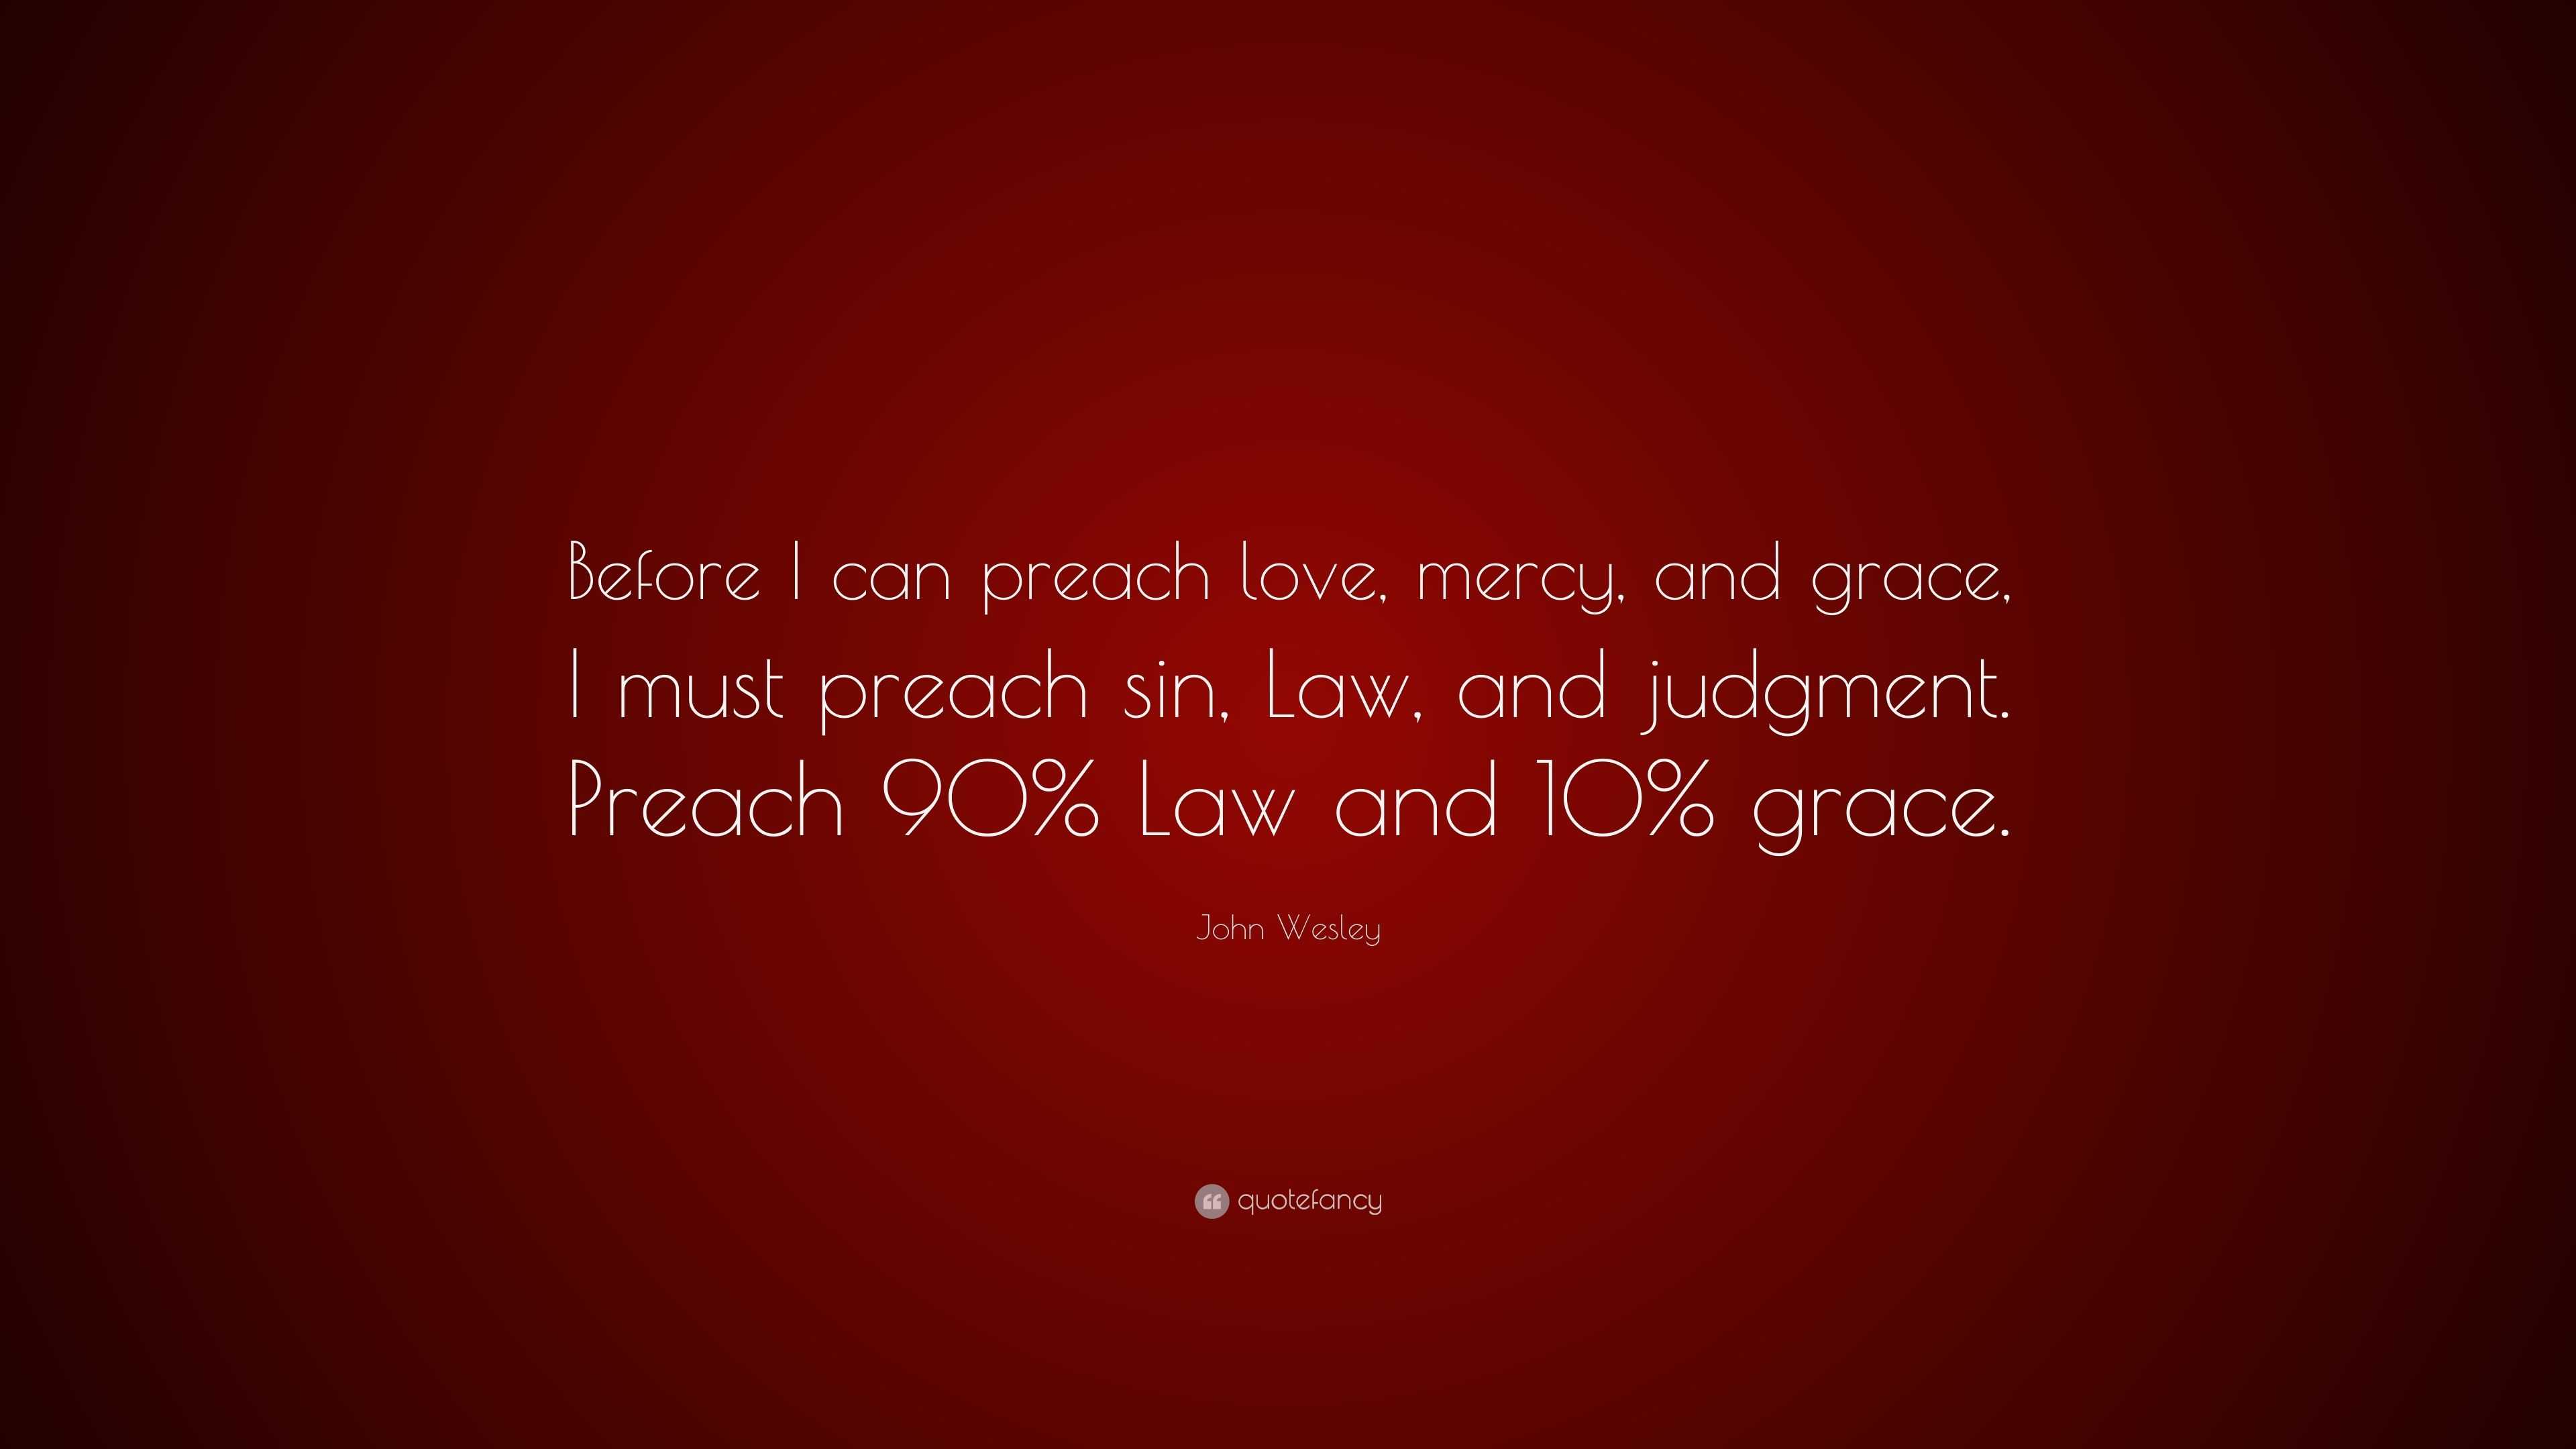 4744271 John Wesley Quote Before I can preach love mercy and grace I must